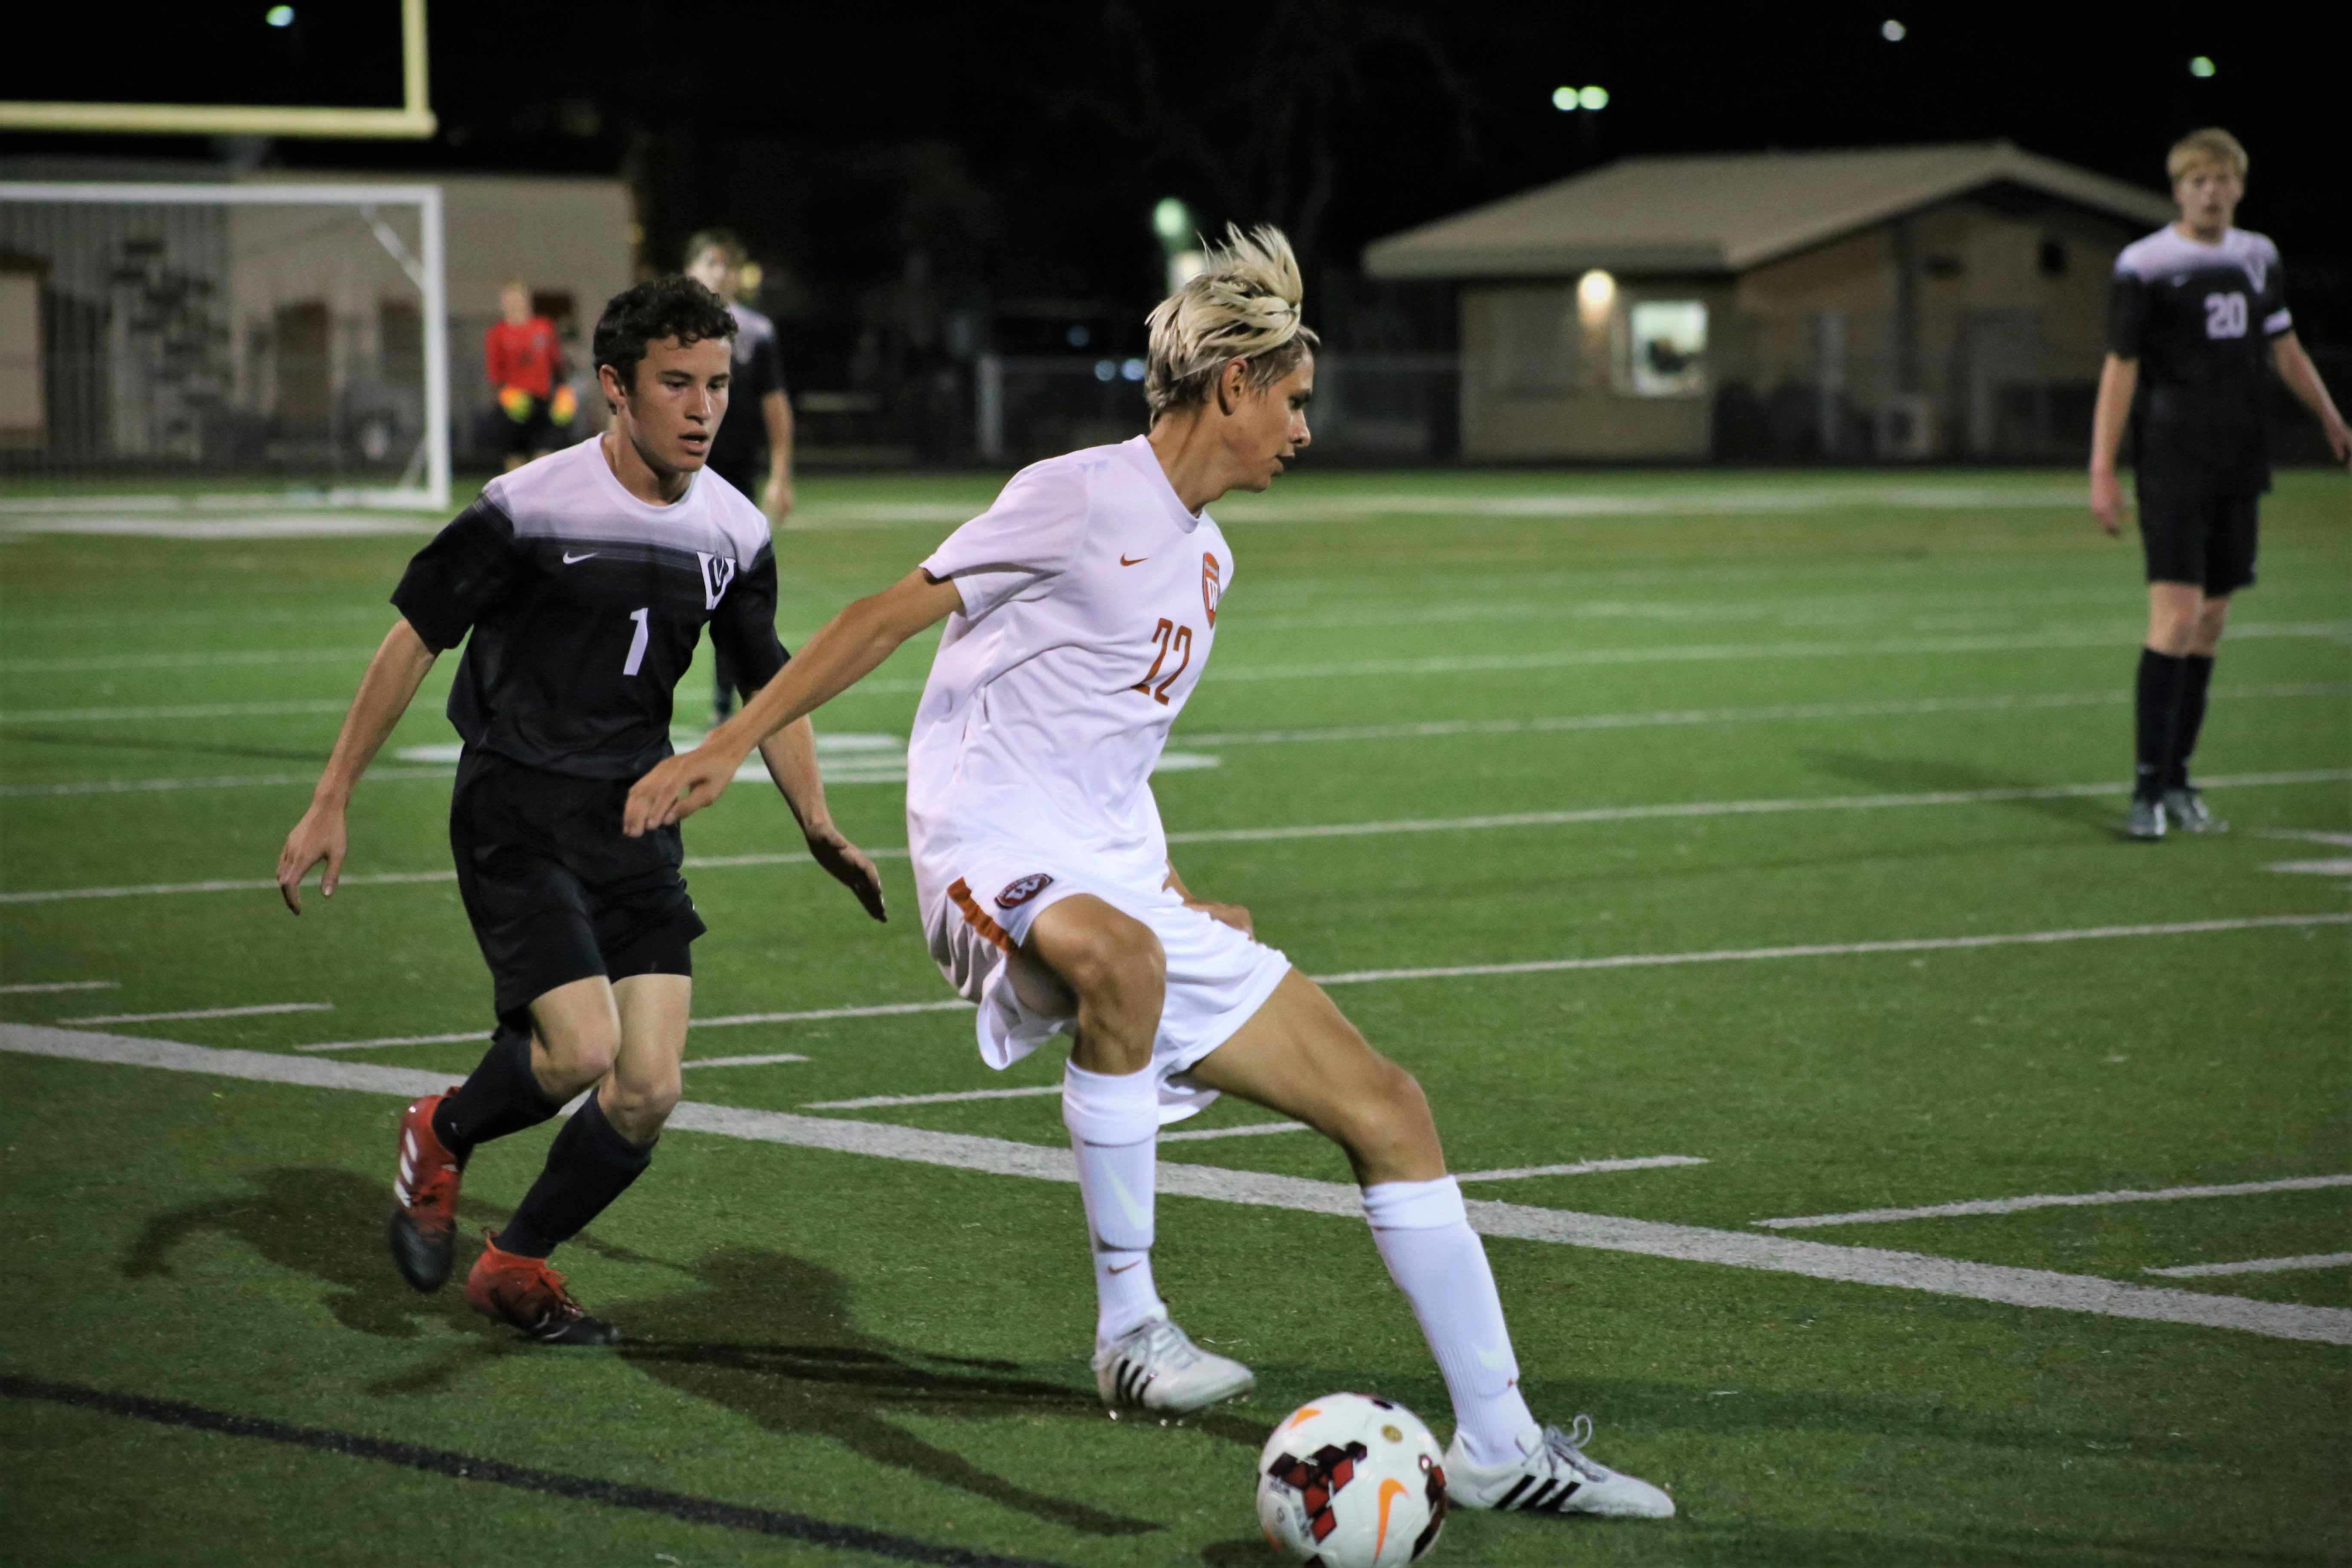 Rodriguez%2C+Vrudhula+Lead+Varsity+Boys+Soccer+To+Victory+Over+Vandegrift